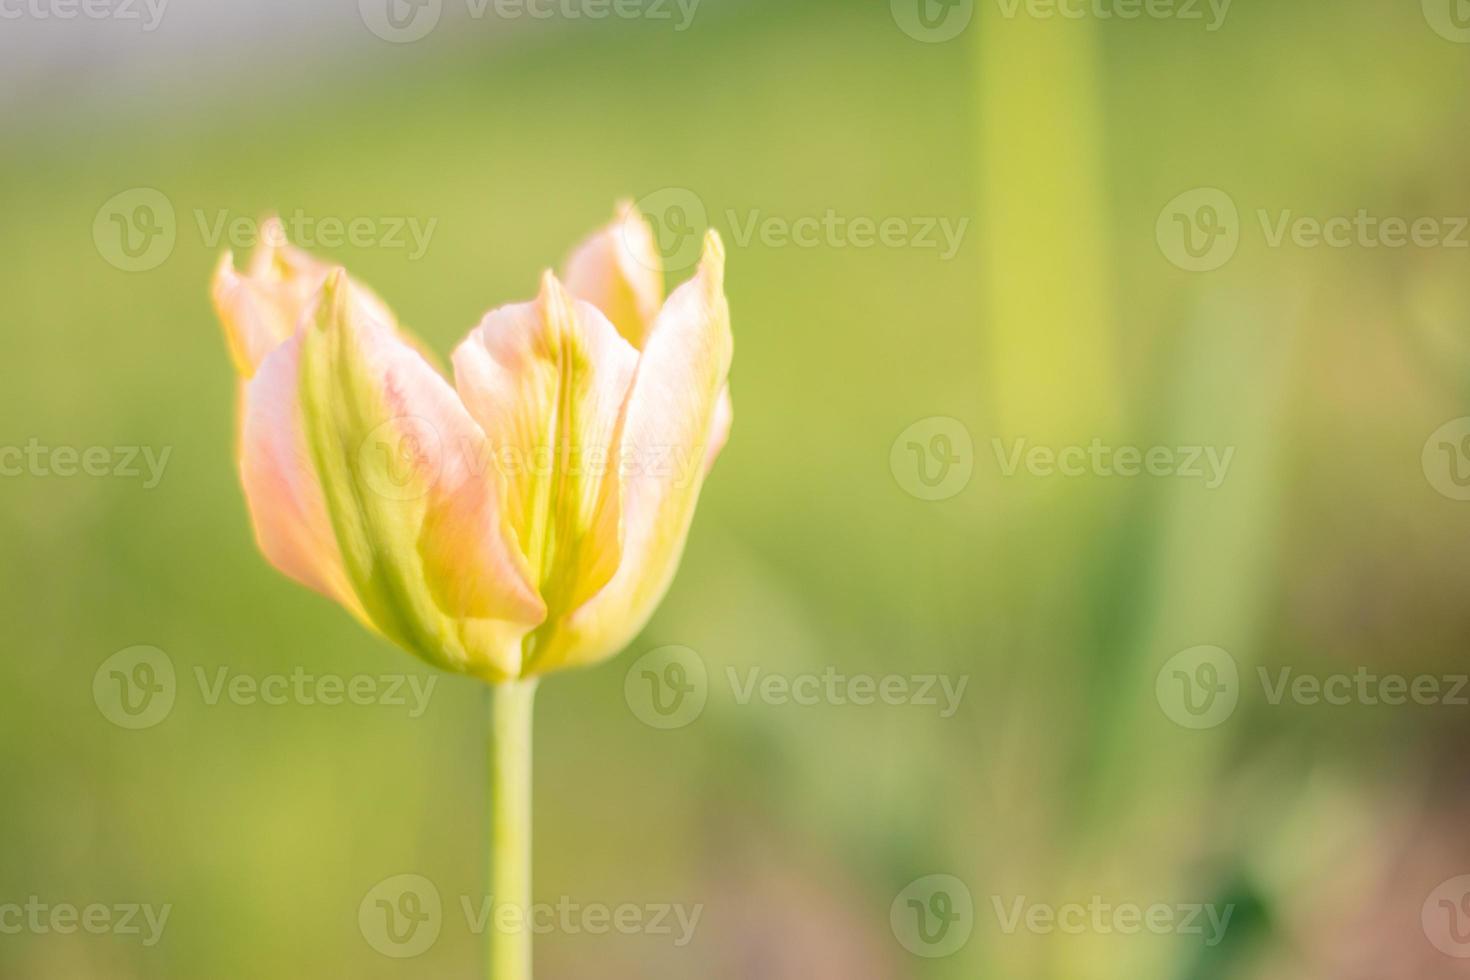 Selective focus of one yellow tulip in the garden with green leaves. Blurred background. A flower that grows among the grass on a warm sunny day. Spring and Easter natural background with tulip. photo